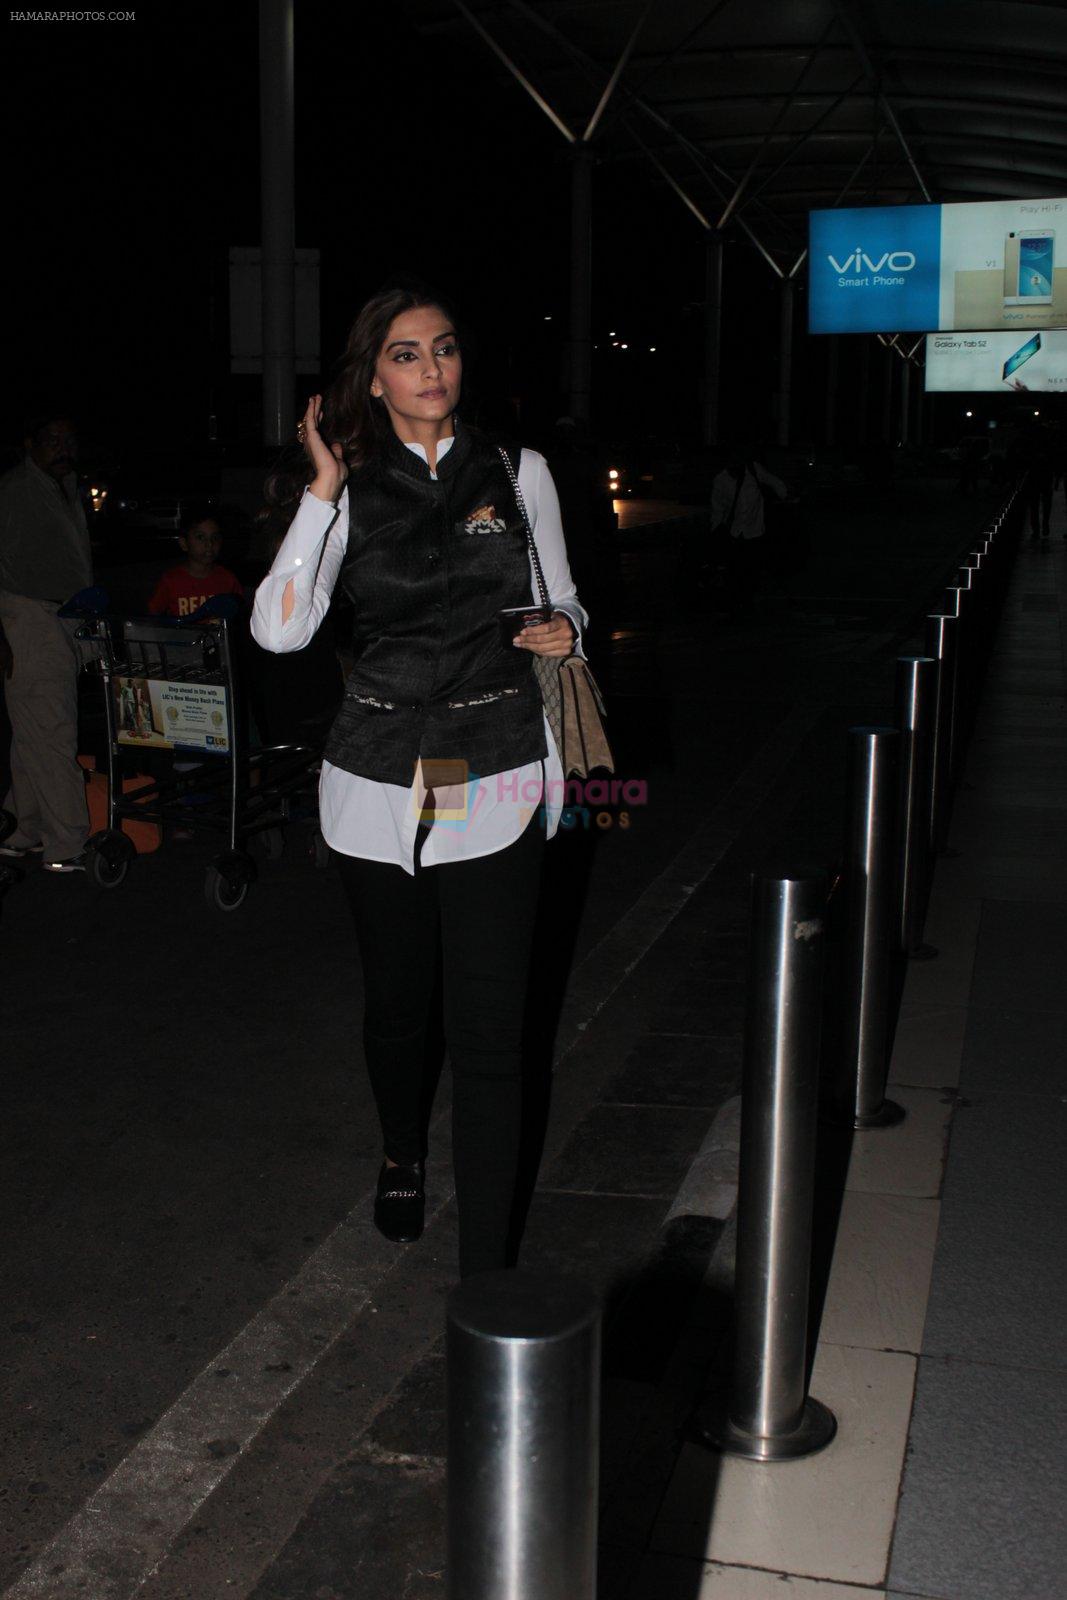 Sonam Kapoor snapped at airport on 6th Nov 2015